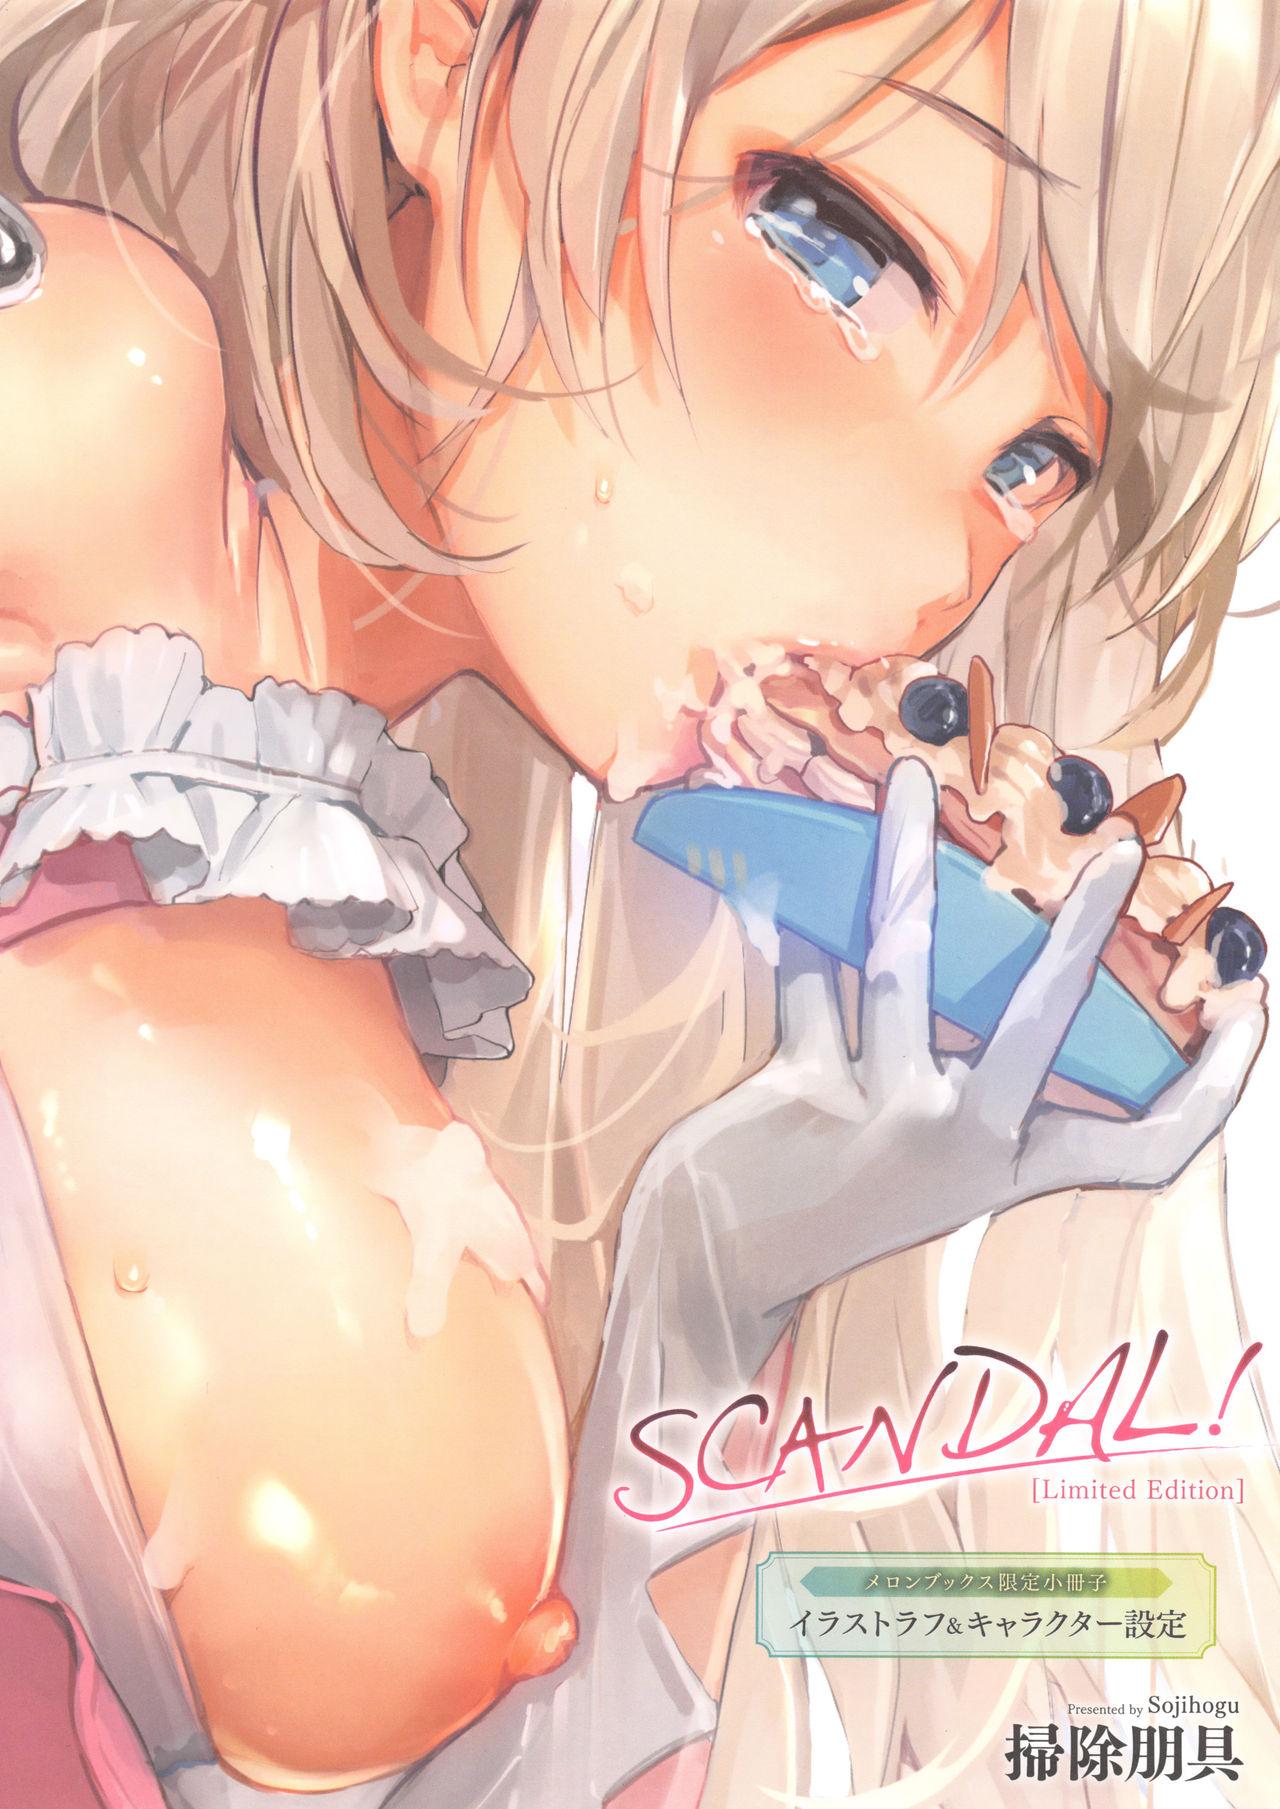 SCANDAL! Limited Edition 157